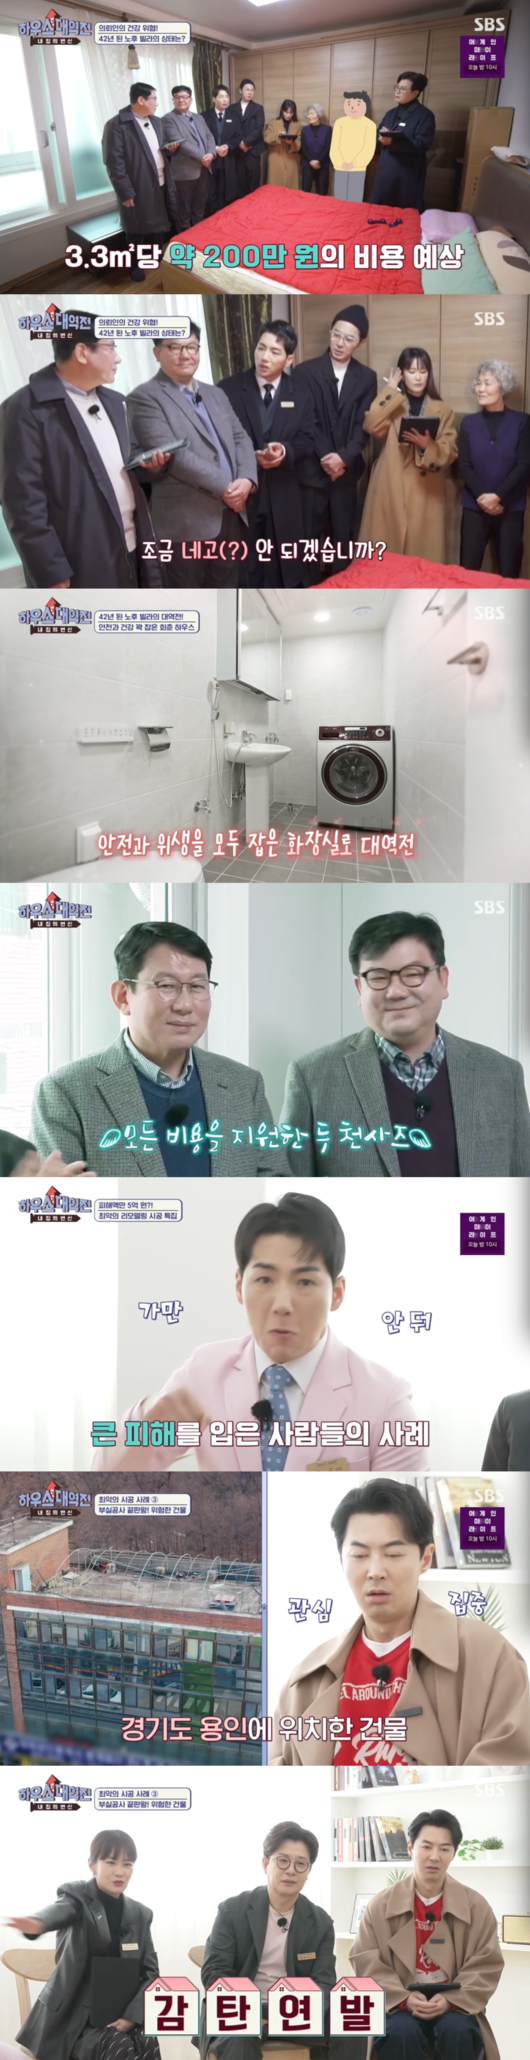 Kim Ji-min, a gag woman who started a public relationship with Kim Jun-ho, a senior Gacon, finally expressed her shyness through House Band War.Kim Seong-jo, Jun Jin, Kim Ji-min and Park Gun met The Client in search of a 42-year-old villa on SBSs transform of my house - house band war broadcast on the afternoon of the 15th.Experts decided to repair the living room, kitchen, two rooms, toilets and veranda, and mentioned 30 million won for the total construction cost.Park Gun asked for Enuri and experts announced the decision, saying, We decided to support the entire construction cost.Kim Ji-min, holding the hands of an expert, smiled with affection for her brother. The Client said, This is what happened to me in the world.I am so grateful, he said again.A few days later, The Clients house was 180 degrees changed.It was difficult to do the construction for a short period of time, but the total cost was 28 million won, experts said. It was the same cost as building a new house except for the frame.We can live for another 40 years before the reconstruction, he said.The case of the damage to the remodeling fraud was then released.The victim said that the contractor was in the middle of the day. I would use it as a portfolio and give it at a low price. The total cost was 51 million won, but the damage is much greater.They said they had no responsibility for the brokerage platform. Jun Jin was angry, saying, What are you always so quiet about? A mole? Park Gun even punches in the air.The brokerage platform should understand the structure, the expert said, and file a civil lawsuit and sue the constructor for fraud. You can walk in violation of the law on the matter.The 28-year-old building in Yongin was insolvent and had zero value. The waterproofing and insulation were completely broken and the mold was blooming due to extensive leakage.The building frame was cracked and could not guarantee safety. It was a coma level in terms of people. Above all, the backbone of the broadcast was a trailer.In next weeks broadcast trailer, Kim Seong-joo, Jun Jin and Park Gun applauded Kim Ji-min, who recently admitted to dating Kim Jun-ho.Kim Ji-min laughed shyly and made those who shouted Thank you to Kim Jun-ho.house band war